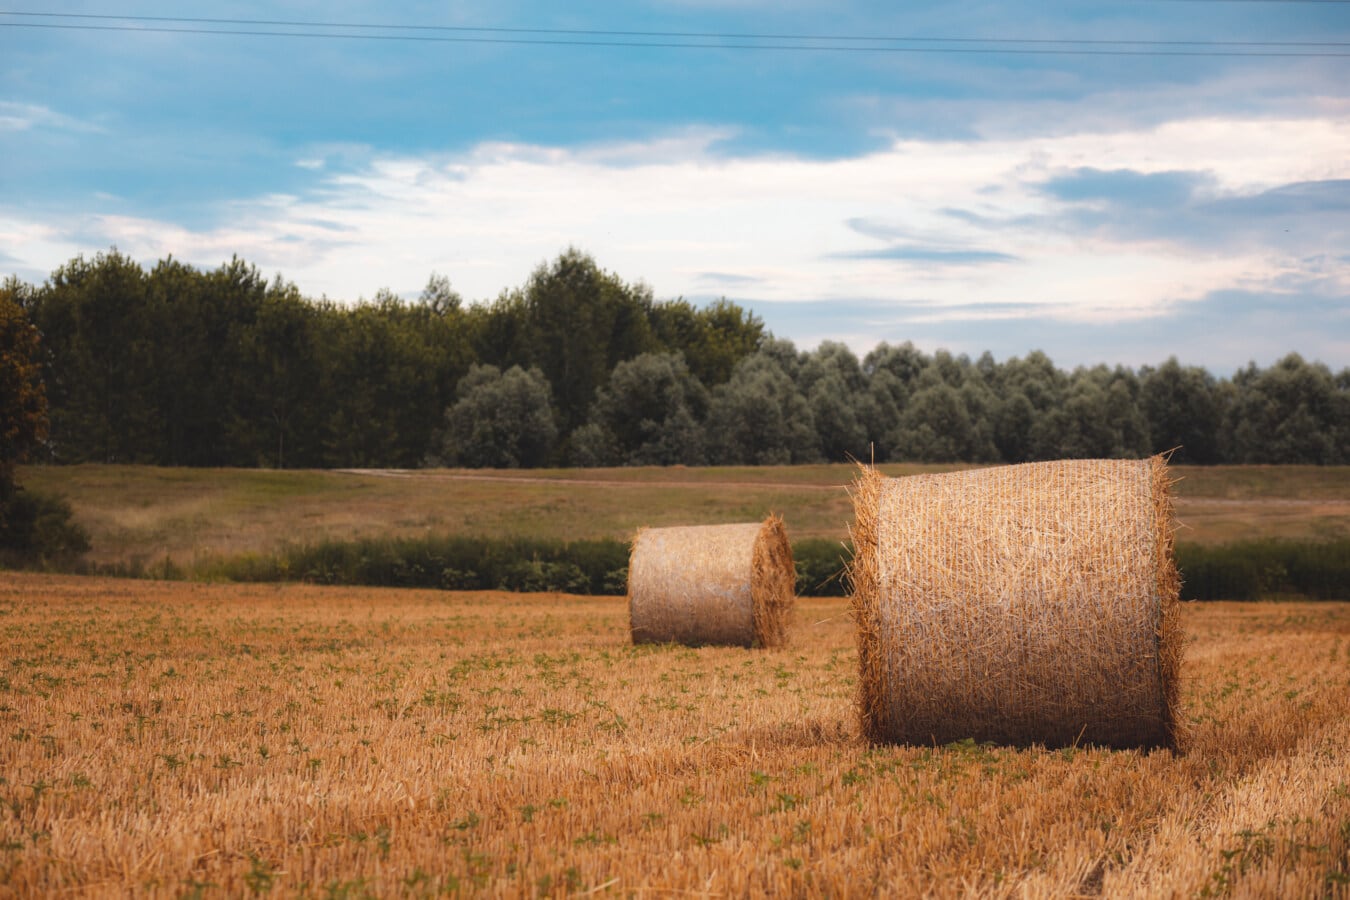 bale, stacks, wheatfield, harvest, flat field, countryside, round, agriculture, wheat, rural